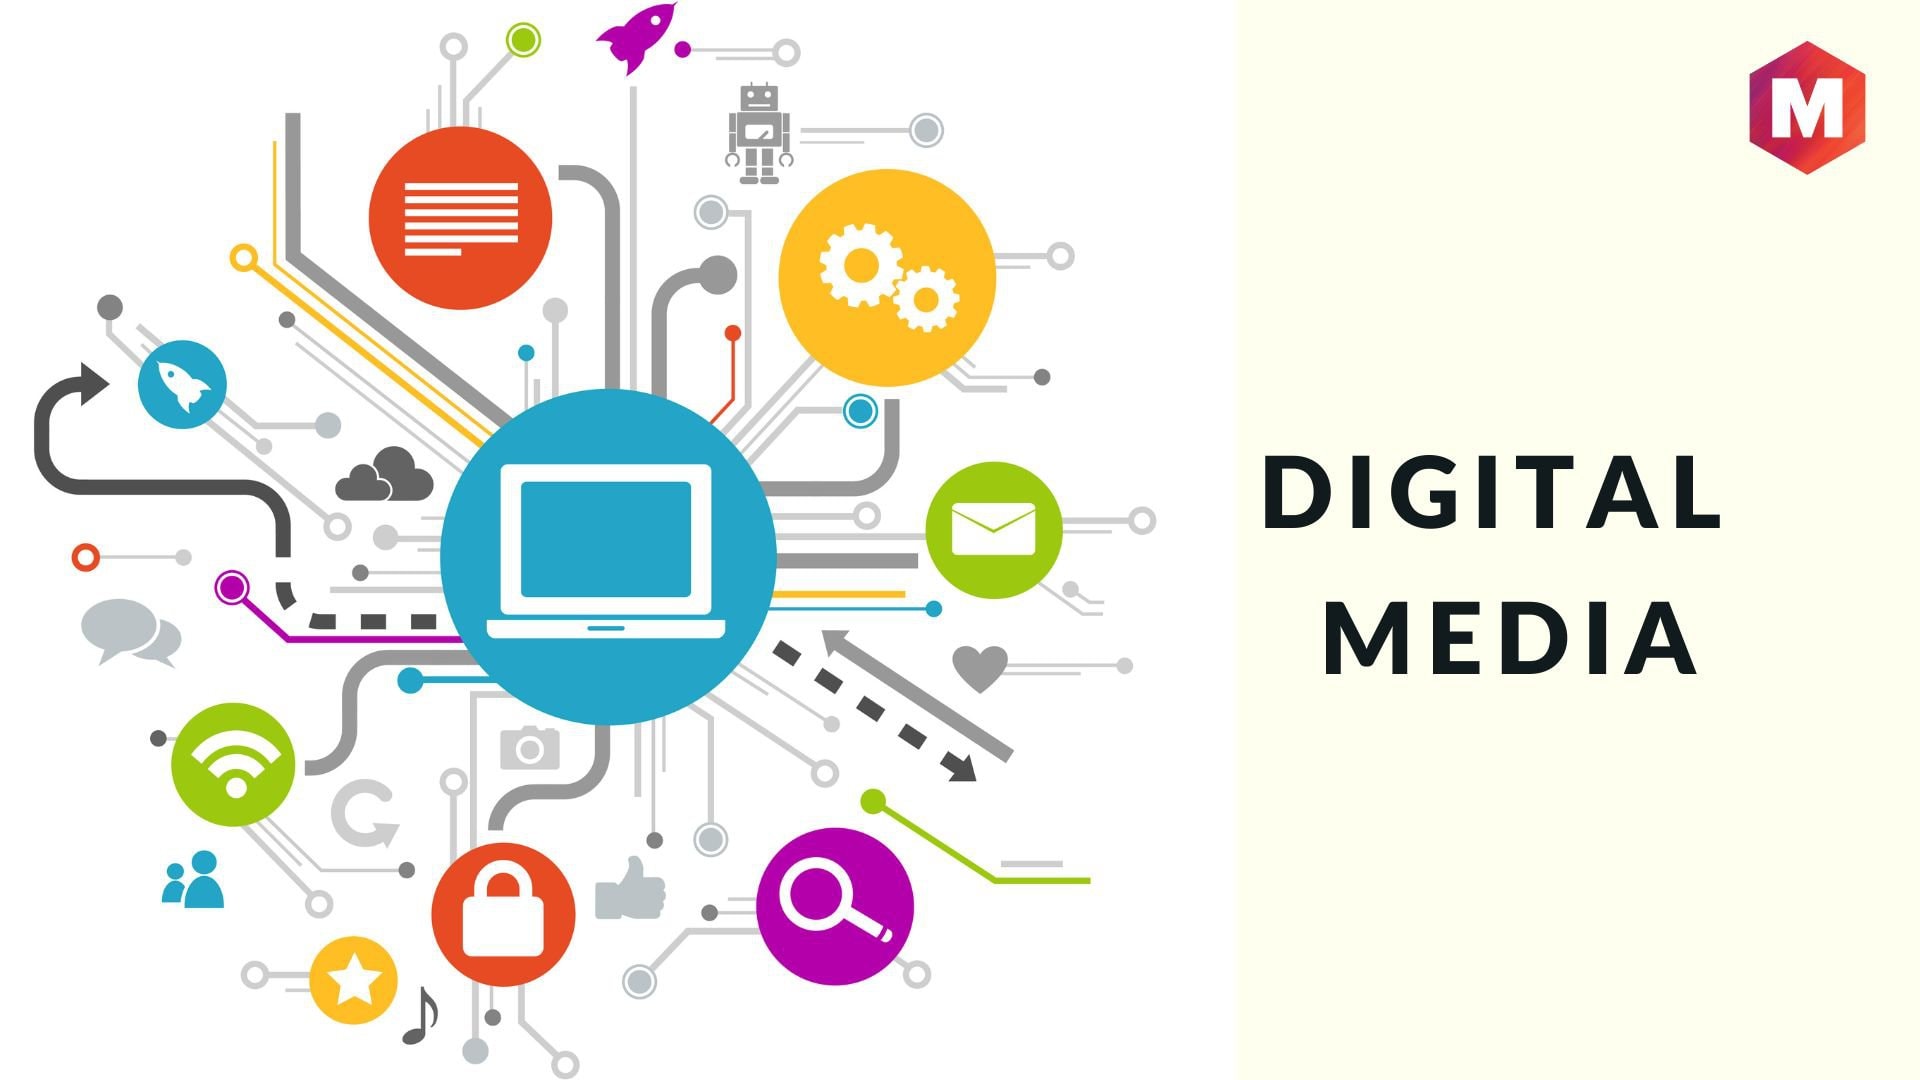 Digital Media - Definition, Importance, Trends and Job Opportunities |  Marketing91